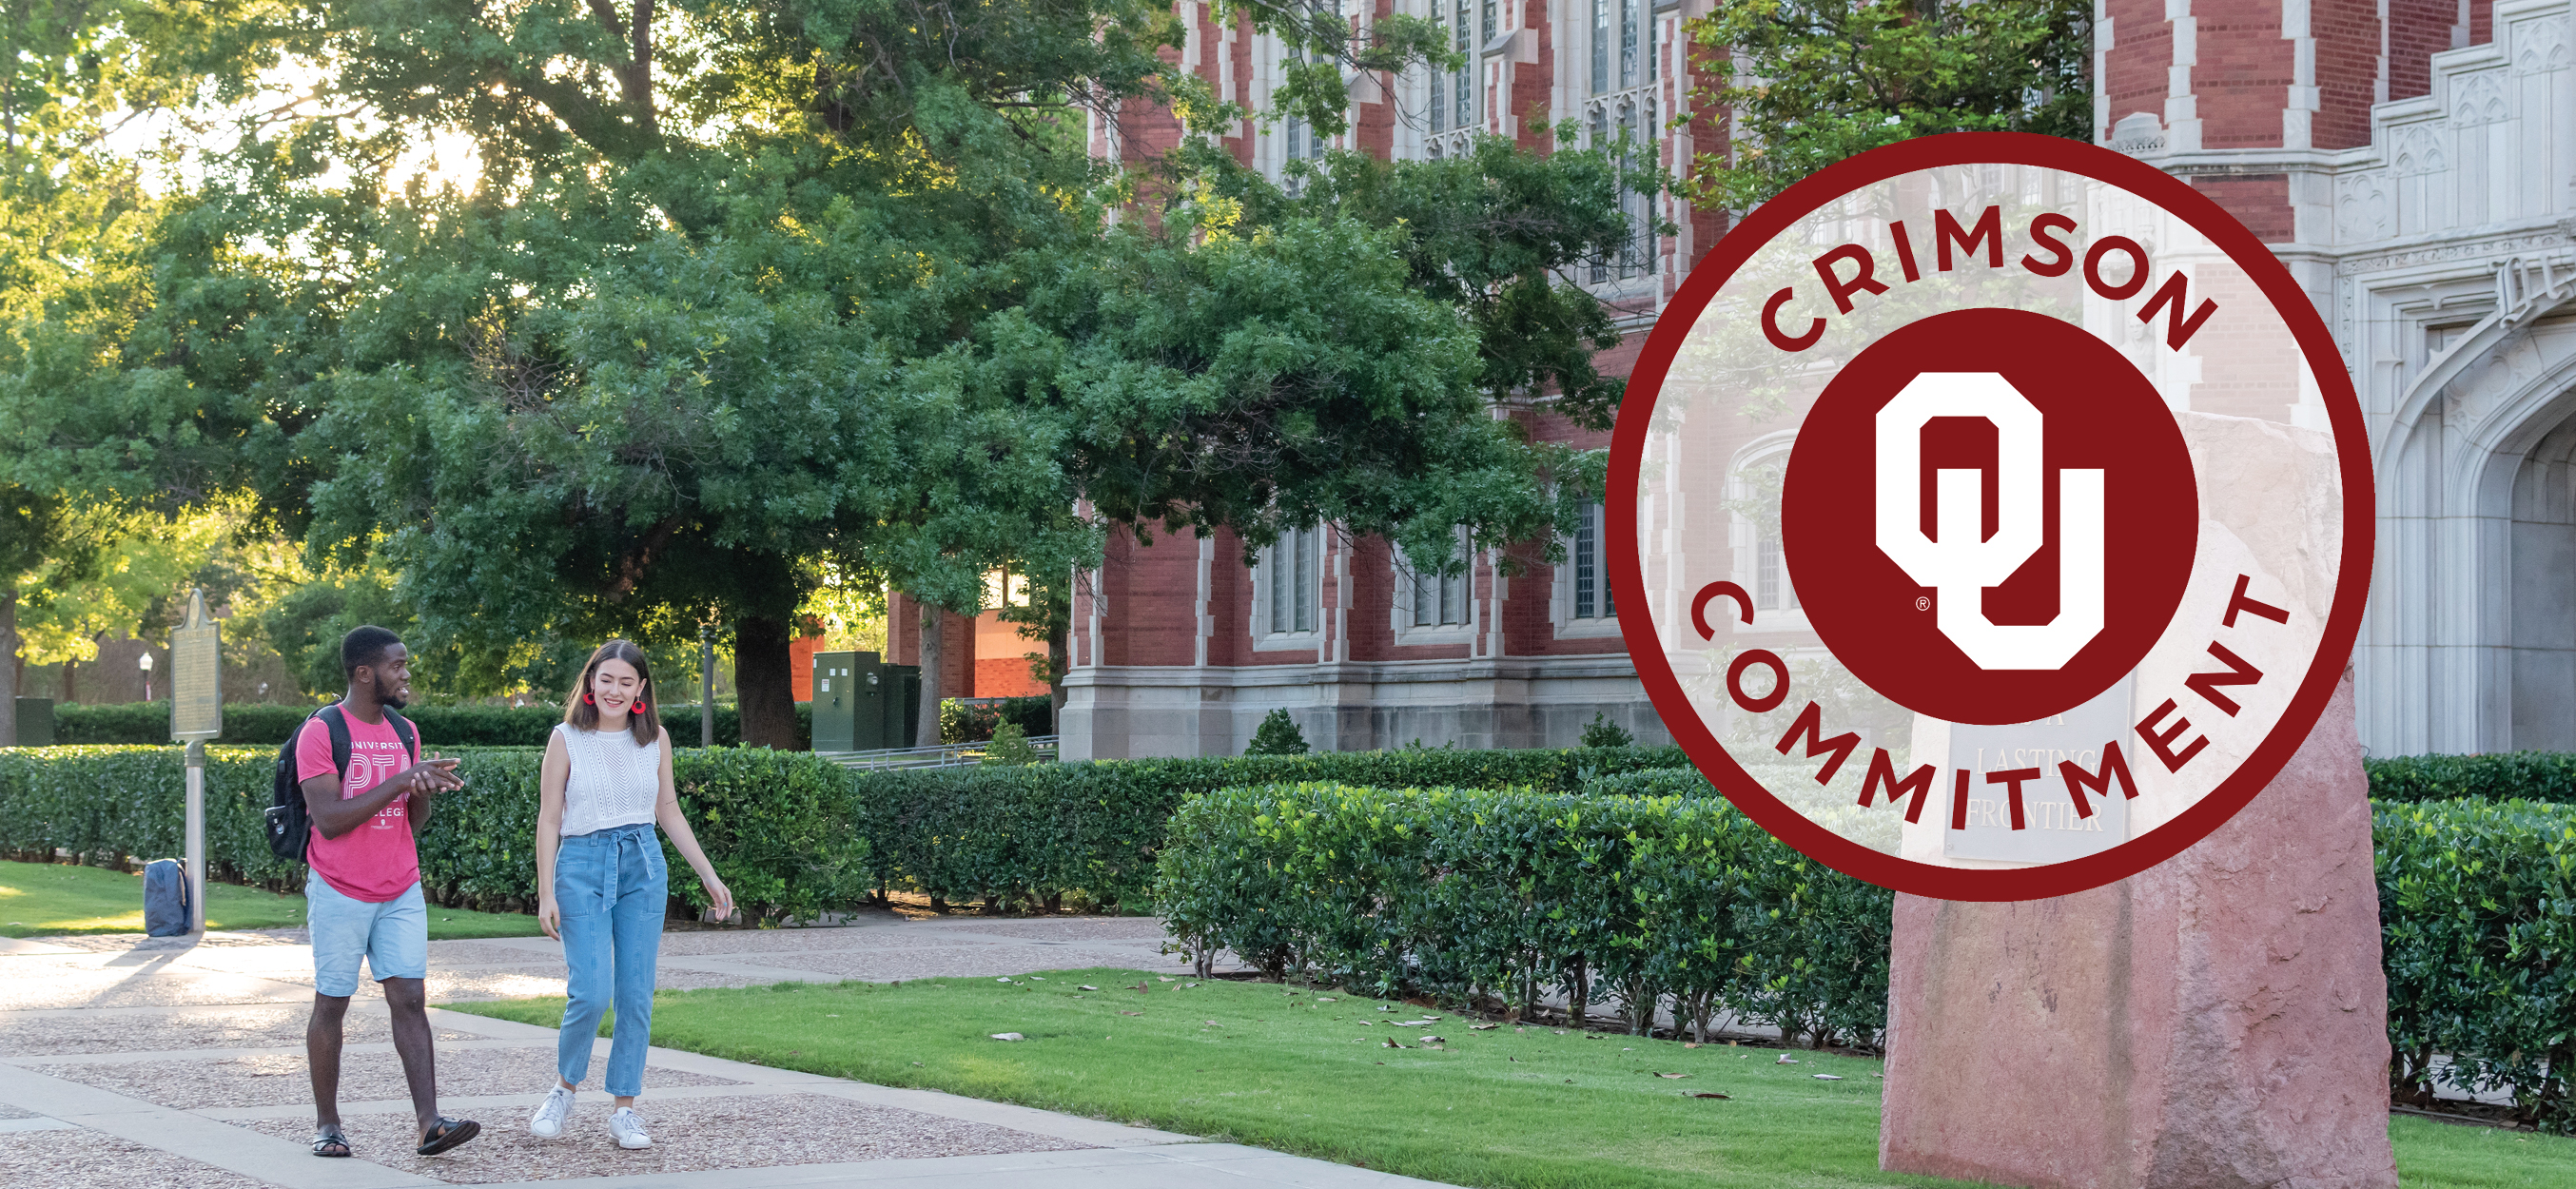 Crimson Commitment: Two students walking on OU campus